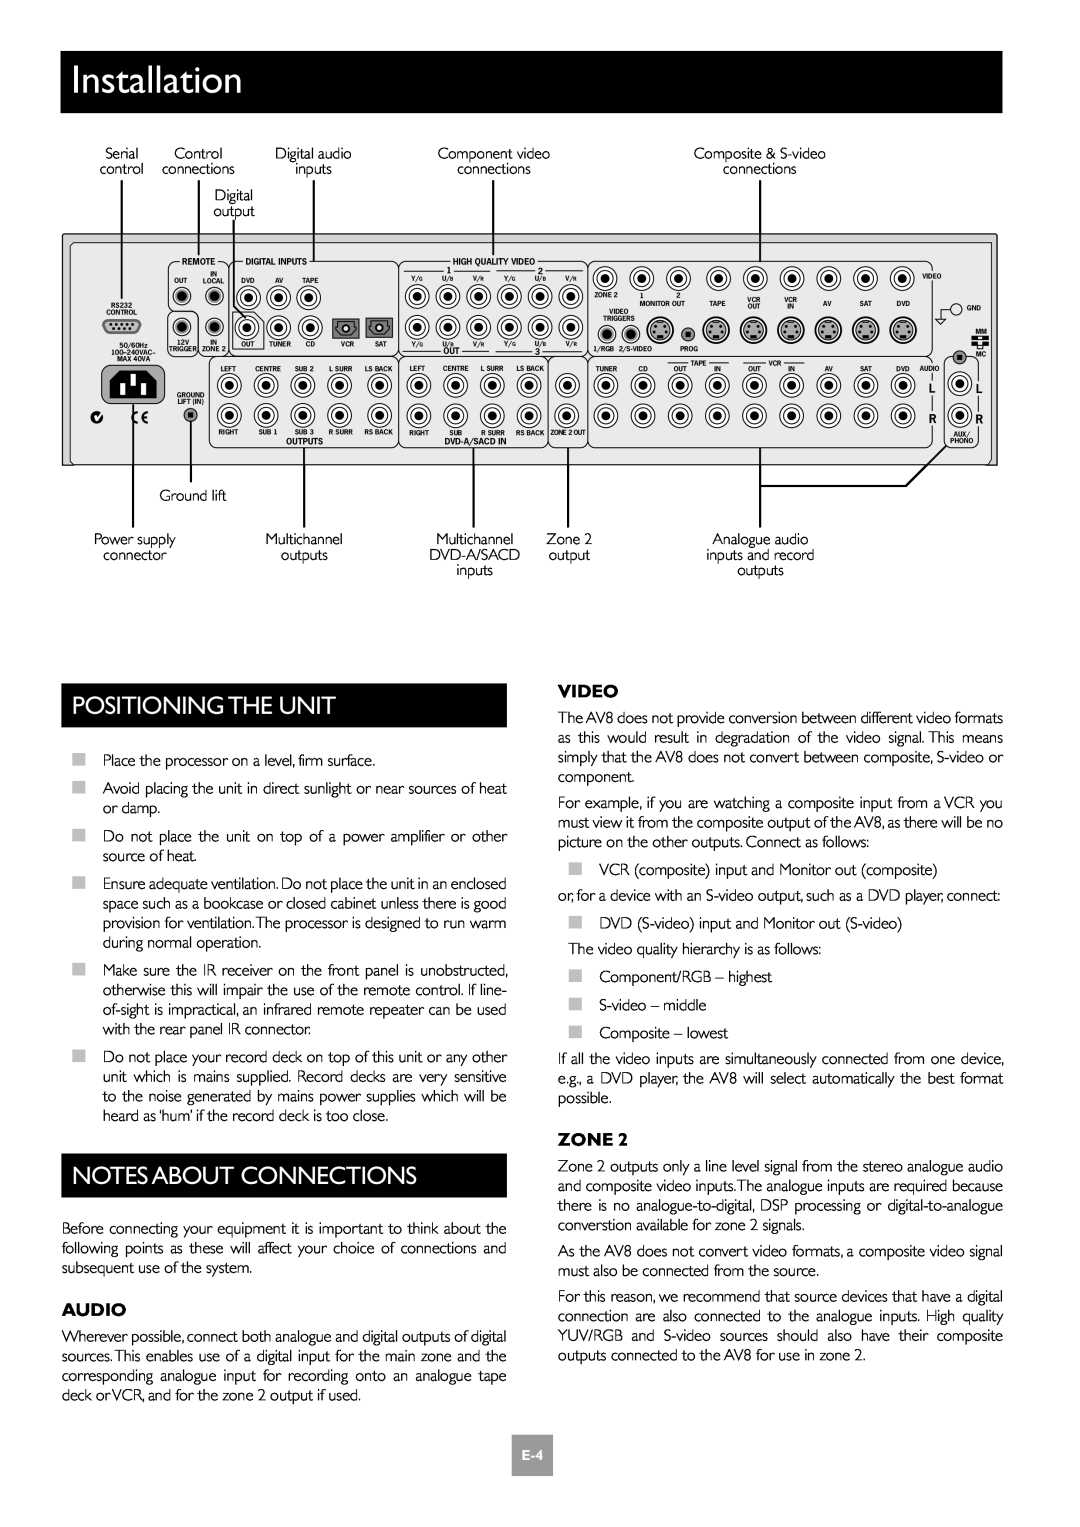 Arcam E-2 manual Installation, Positioning The Unit, Notes About Connections, Video, Audio, Zone 